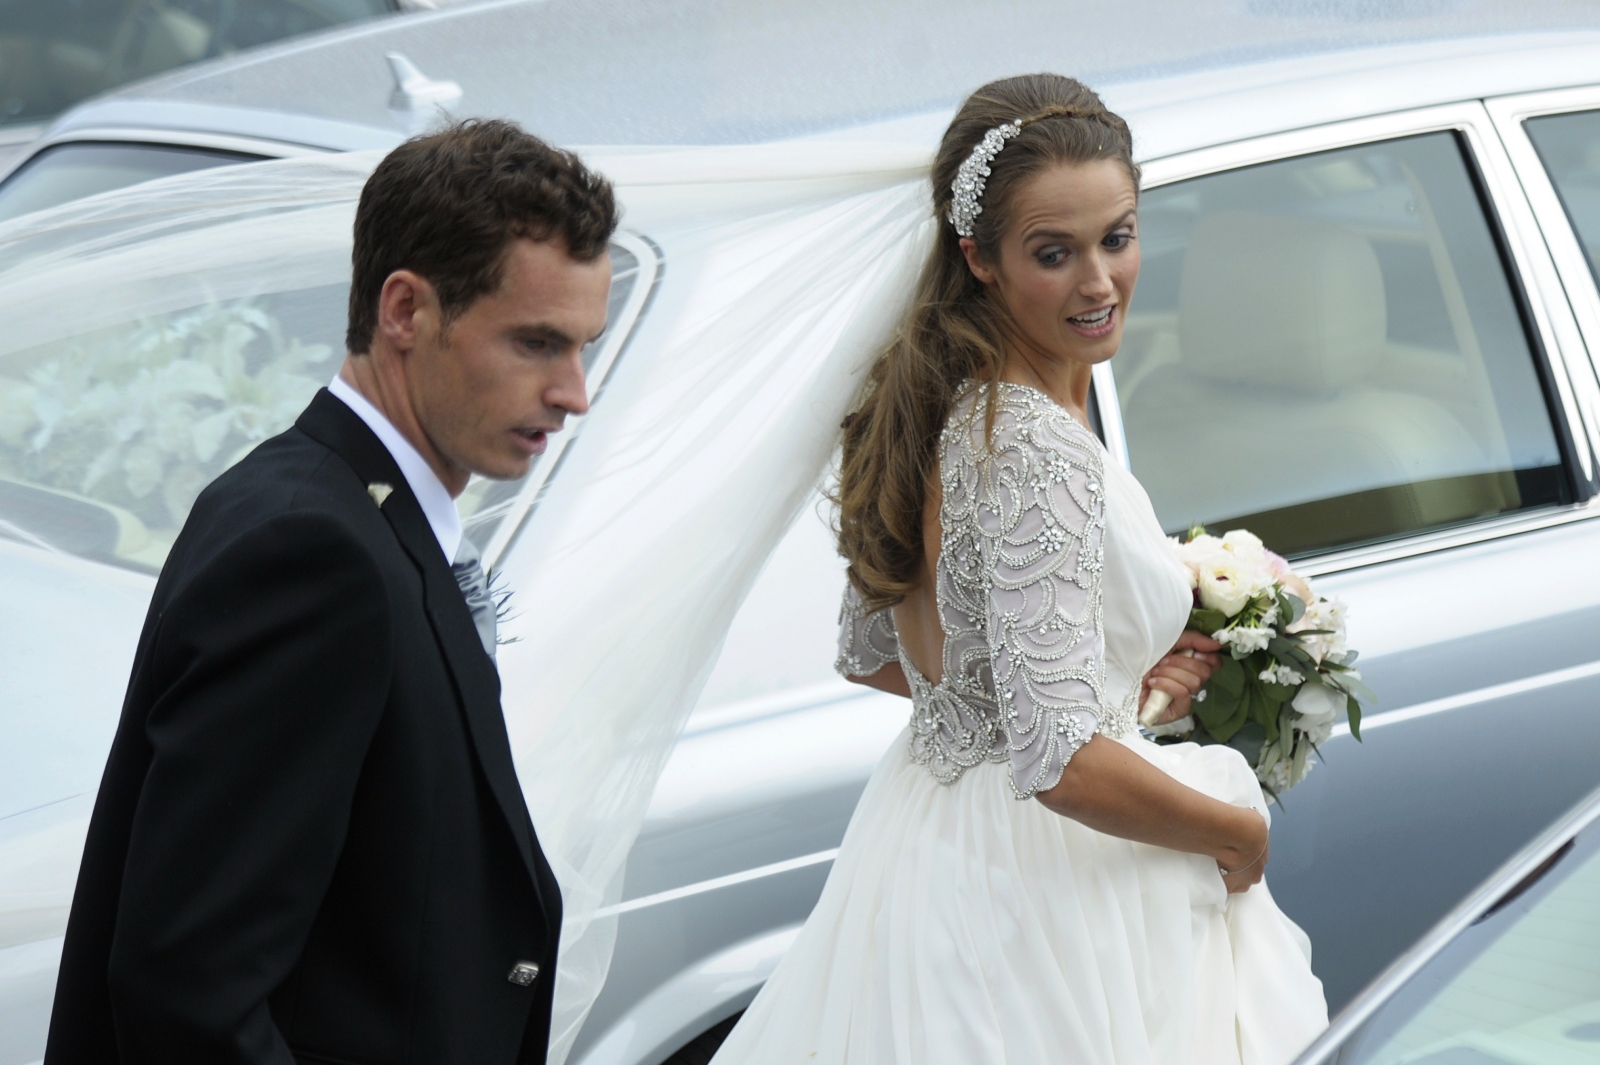 Andy Murray and Kim Sears wedding in pictures